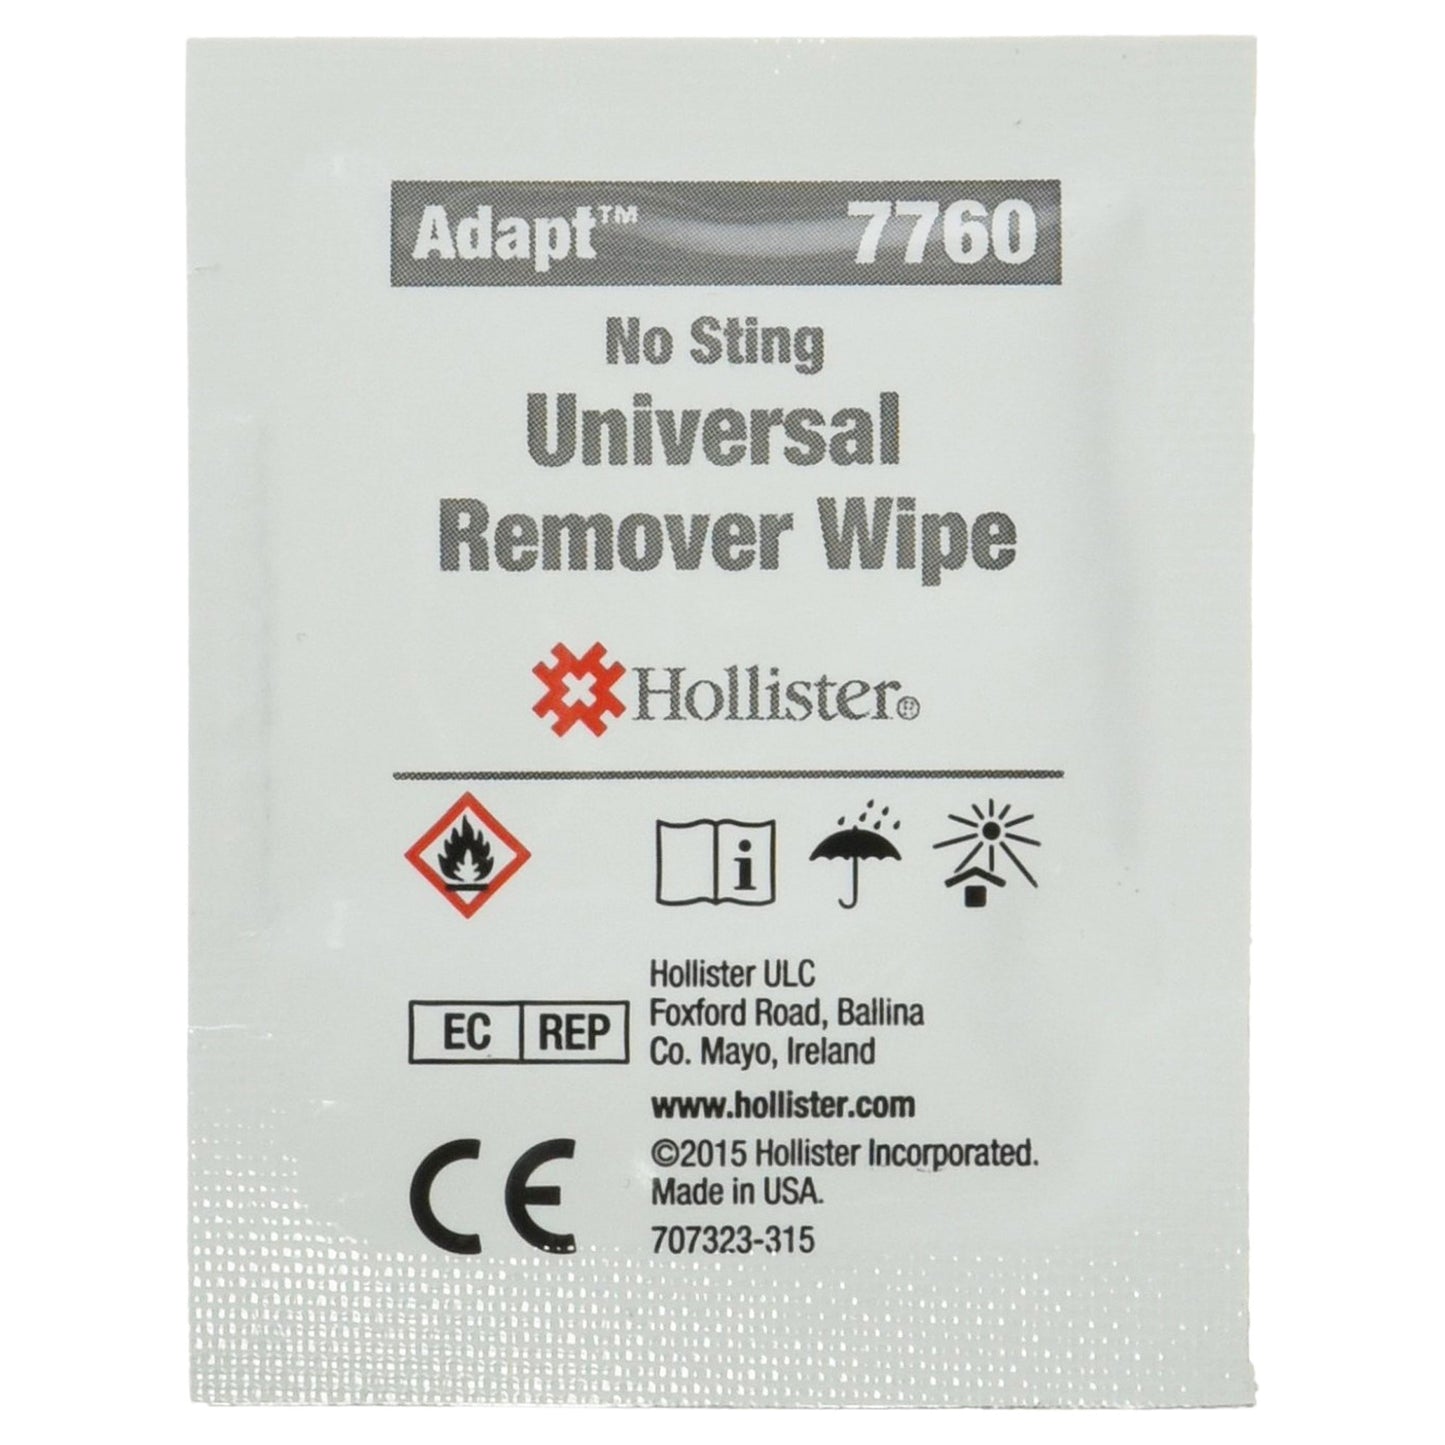 Adapt Adhesive and Barrier Remover, 1-1/2 x 2 Inch